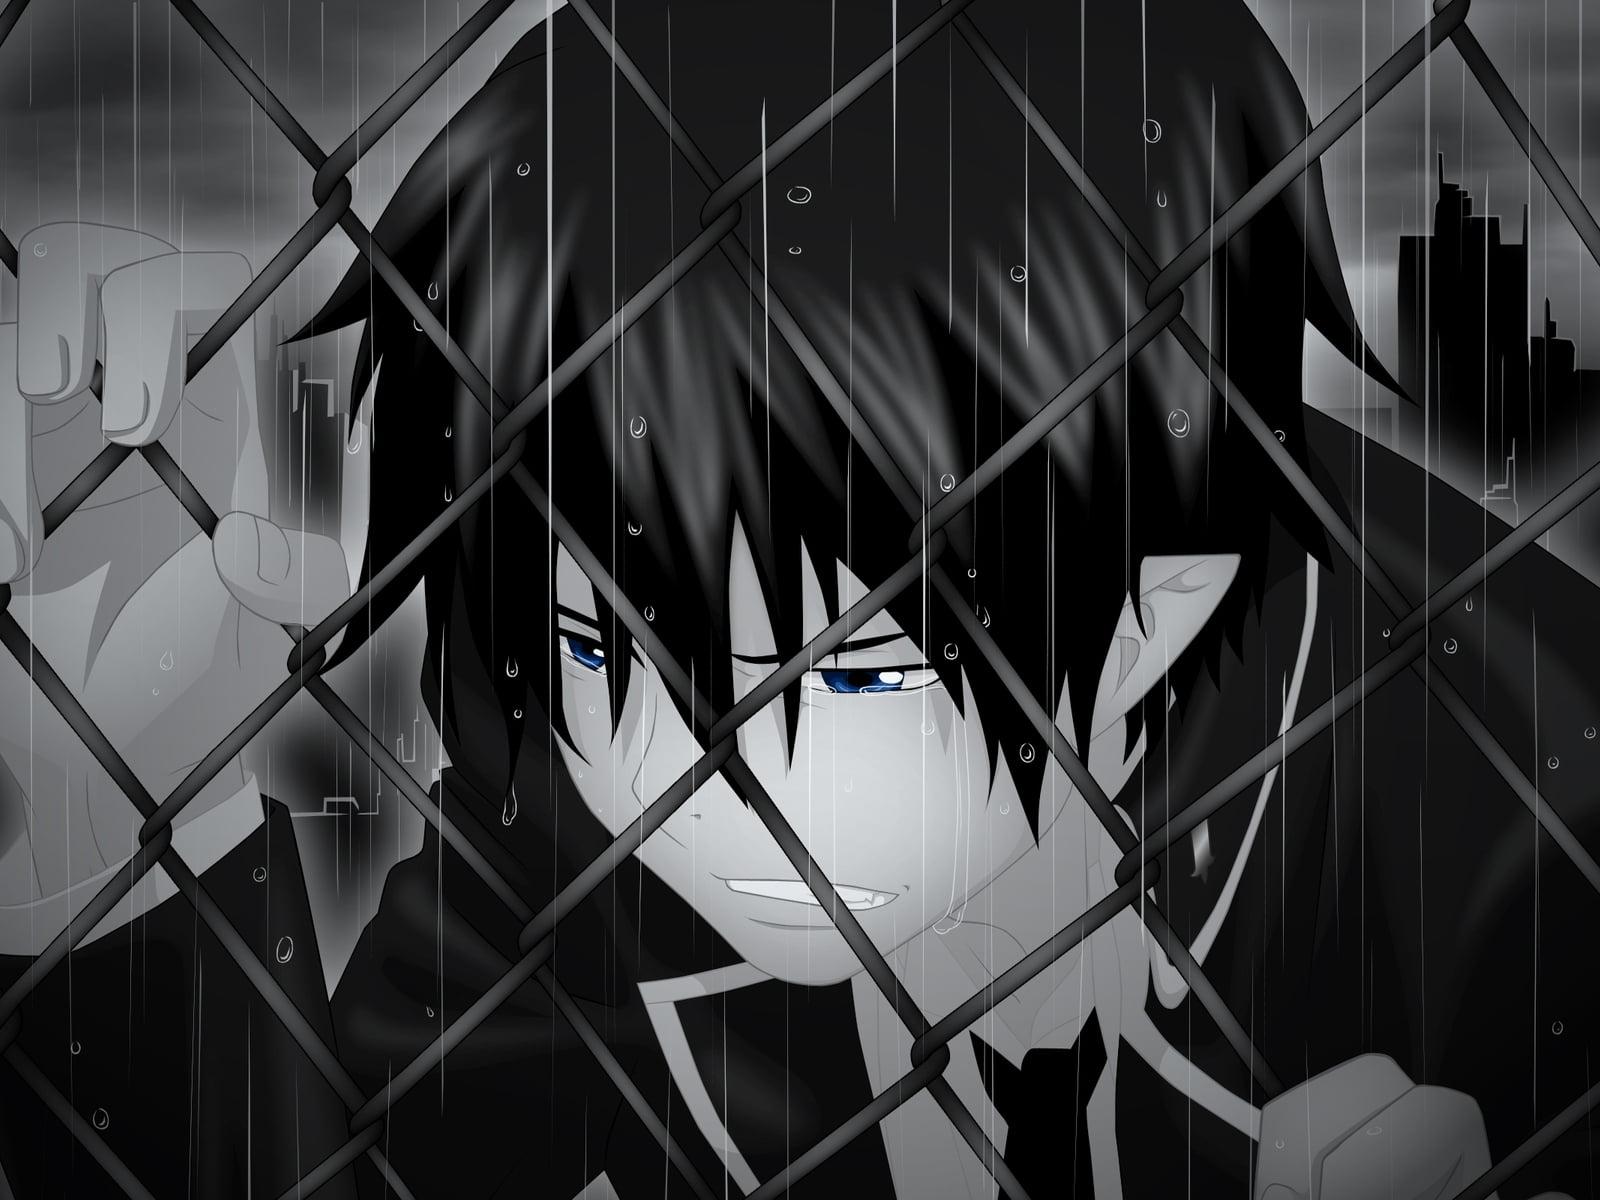 Male anime character crying under the rain while holding